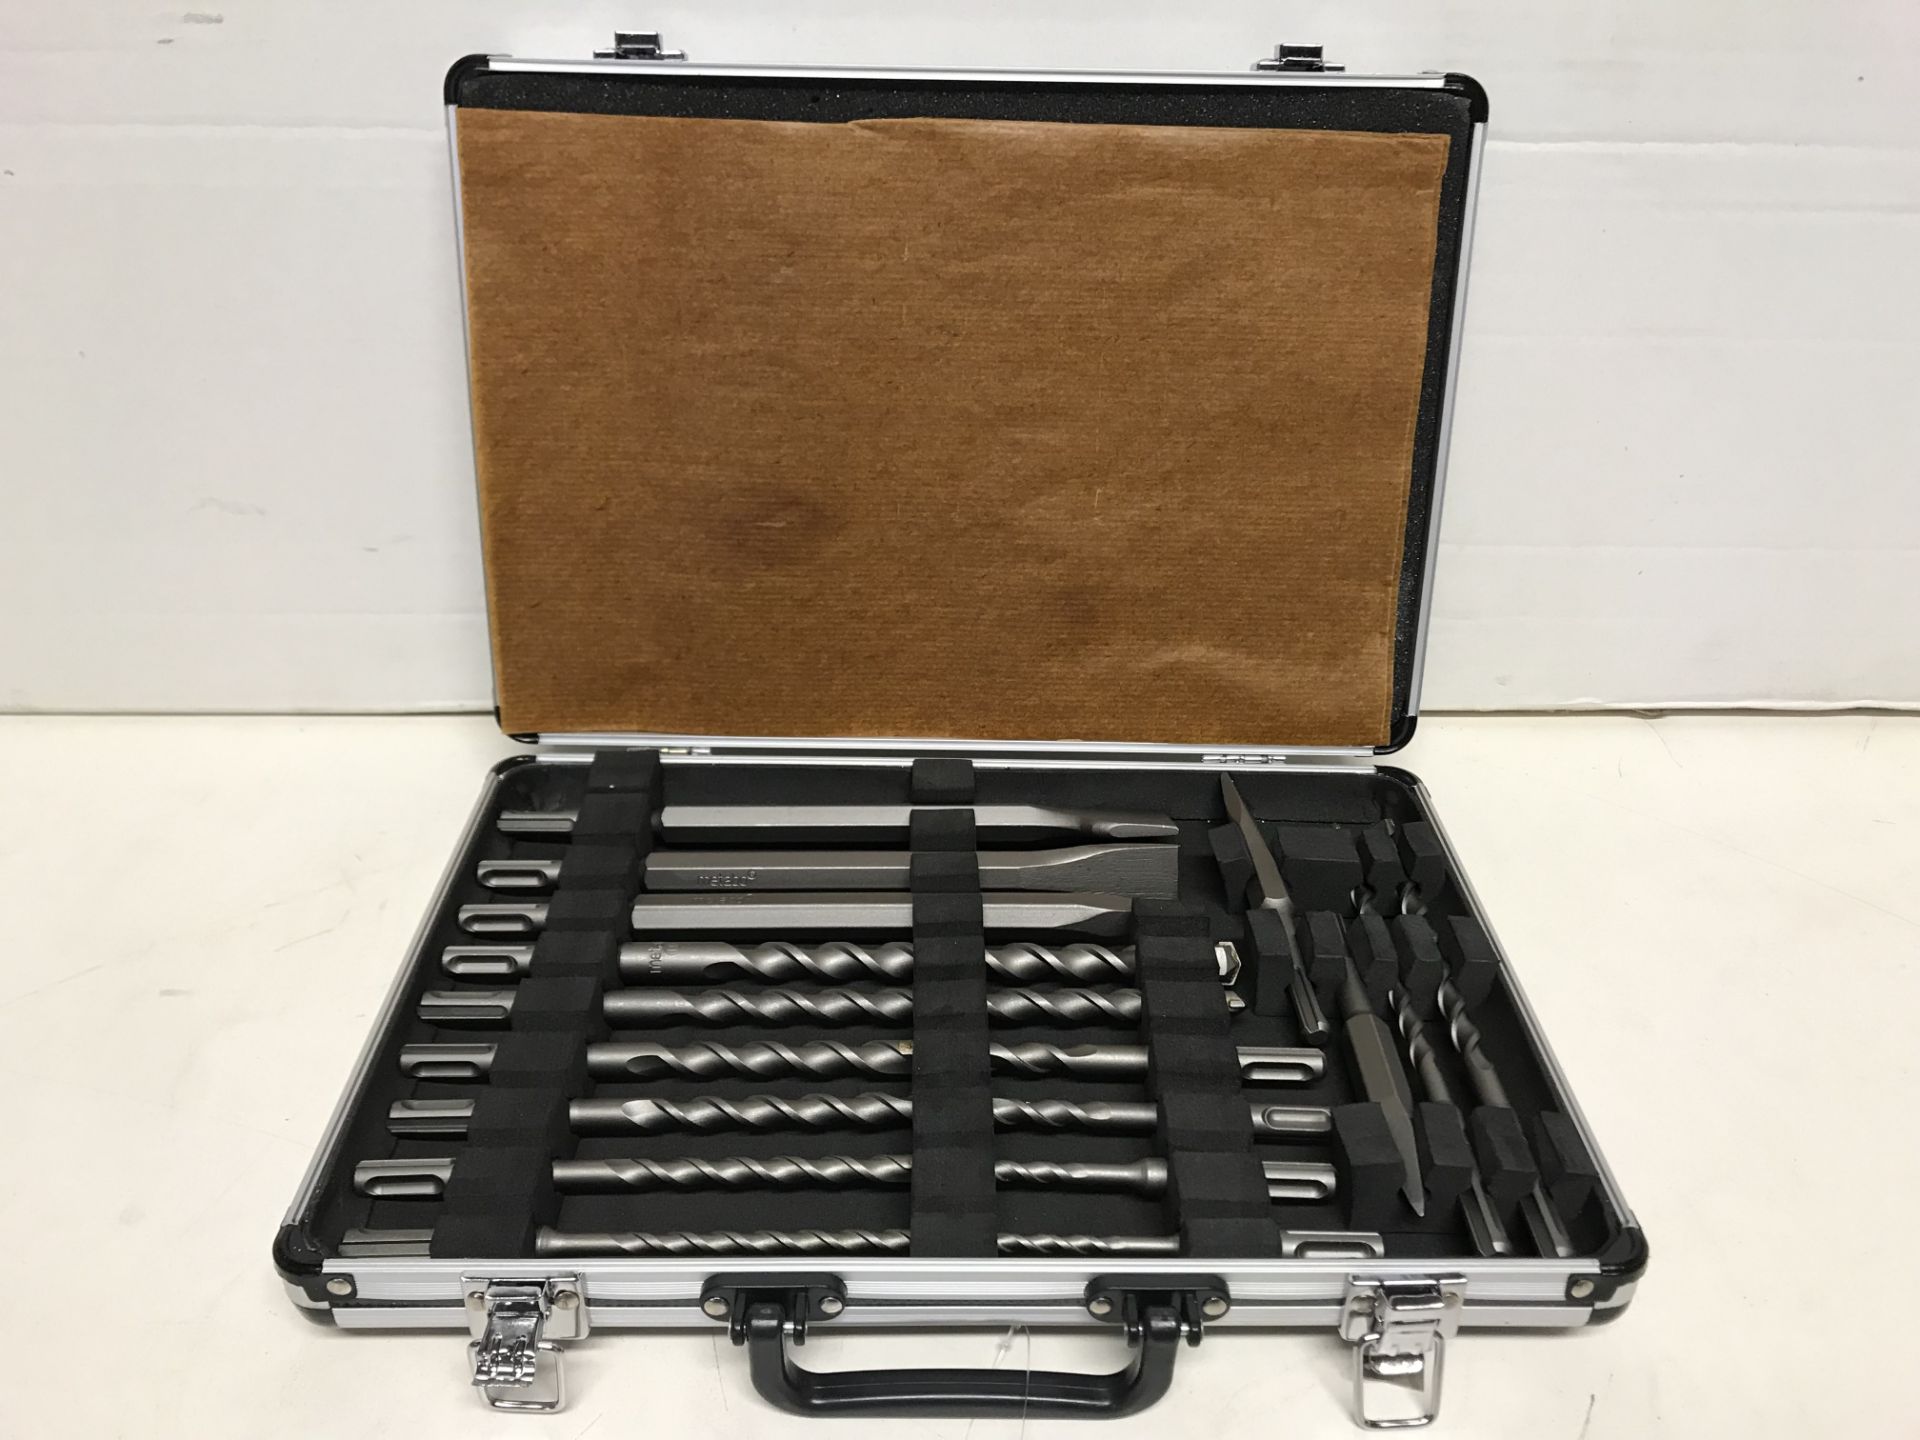 1 x Metabo -628414000 Drill/Chisel Set 17 Pieces in Aluminium Case Carbide Drill Bit for Concrete Ma - Image 3 of 3